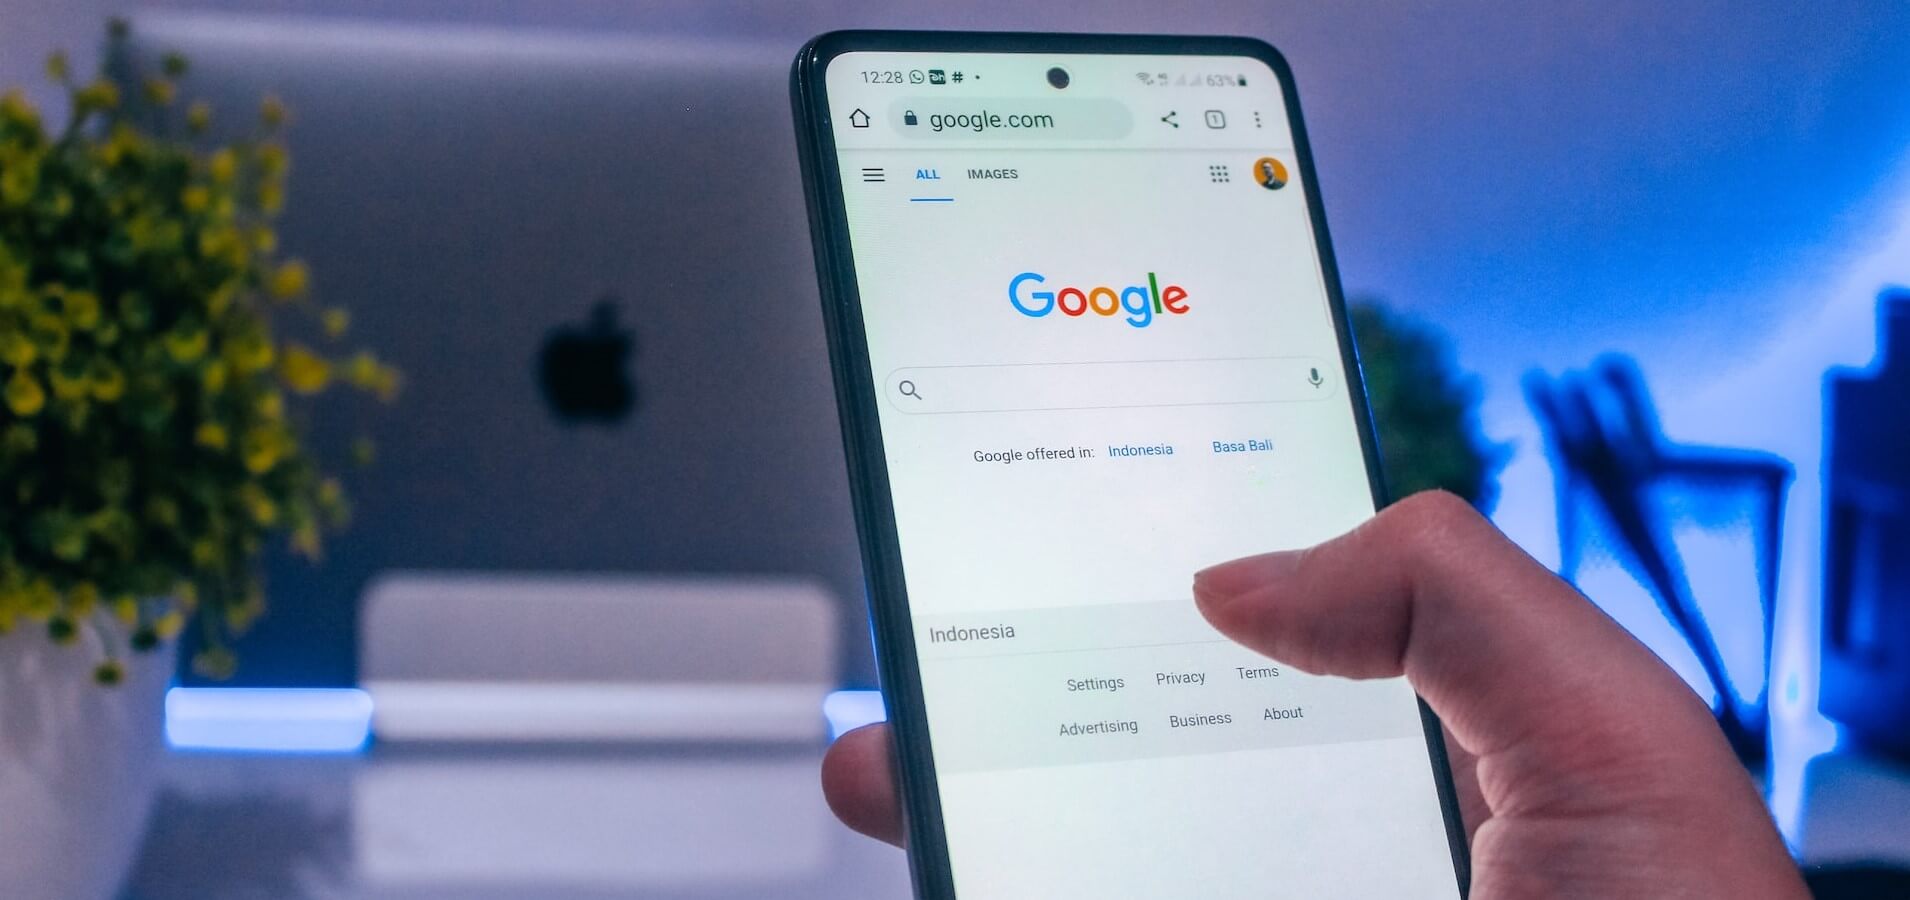 how to check search history on iphone